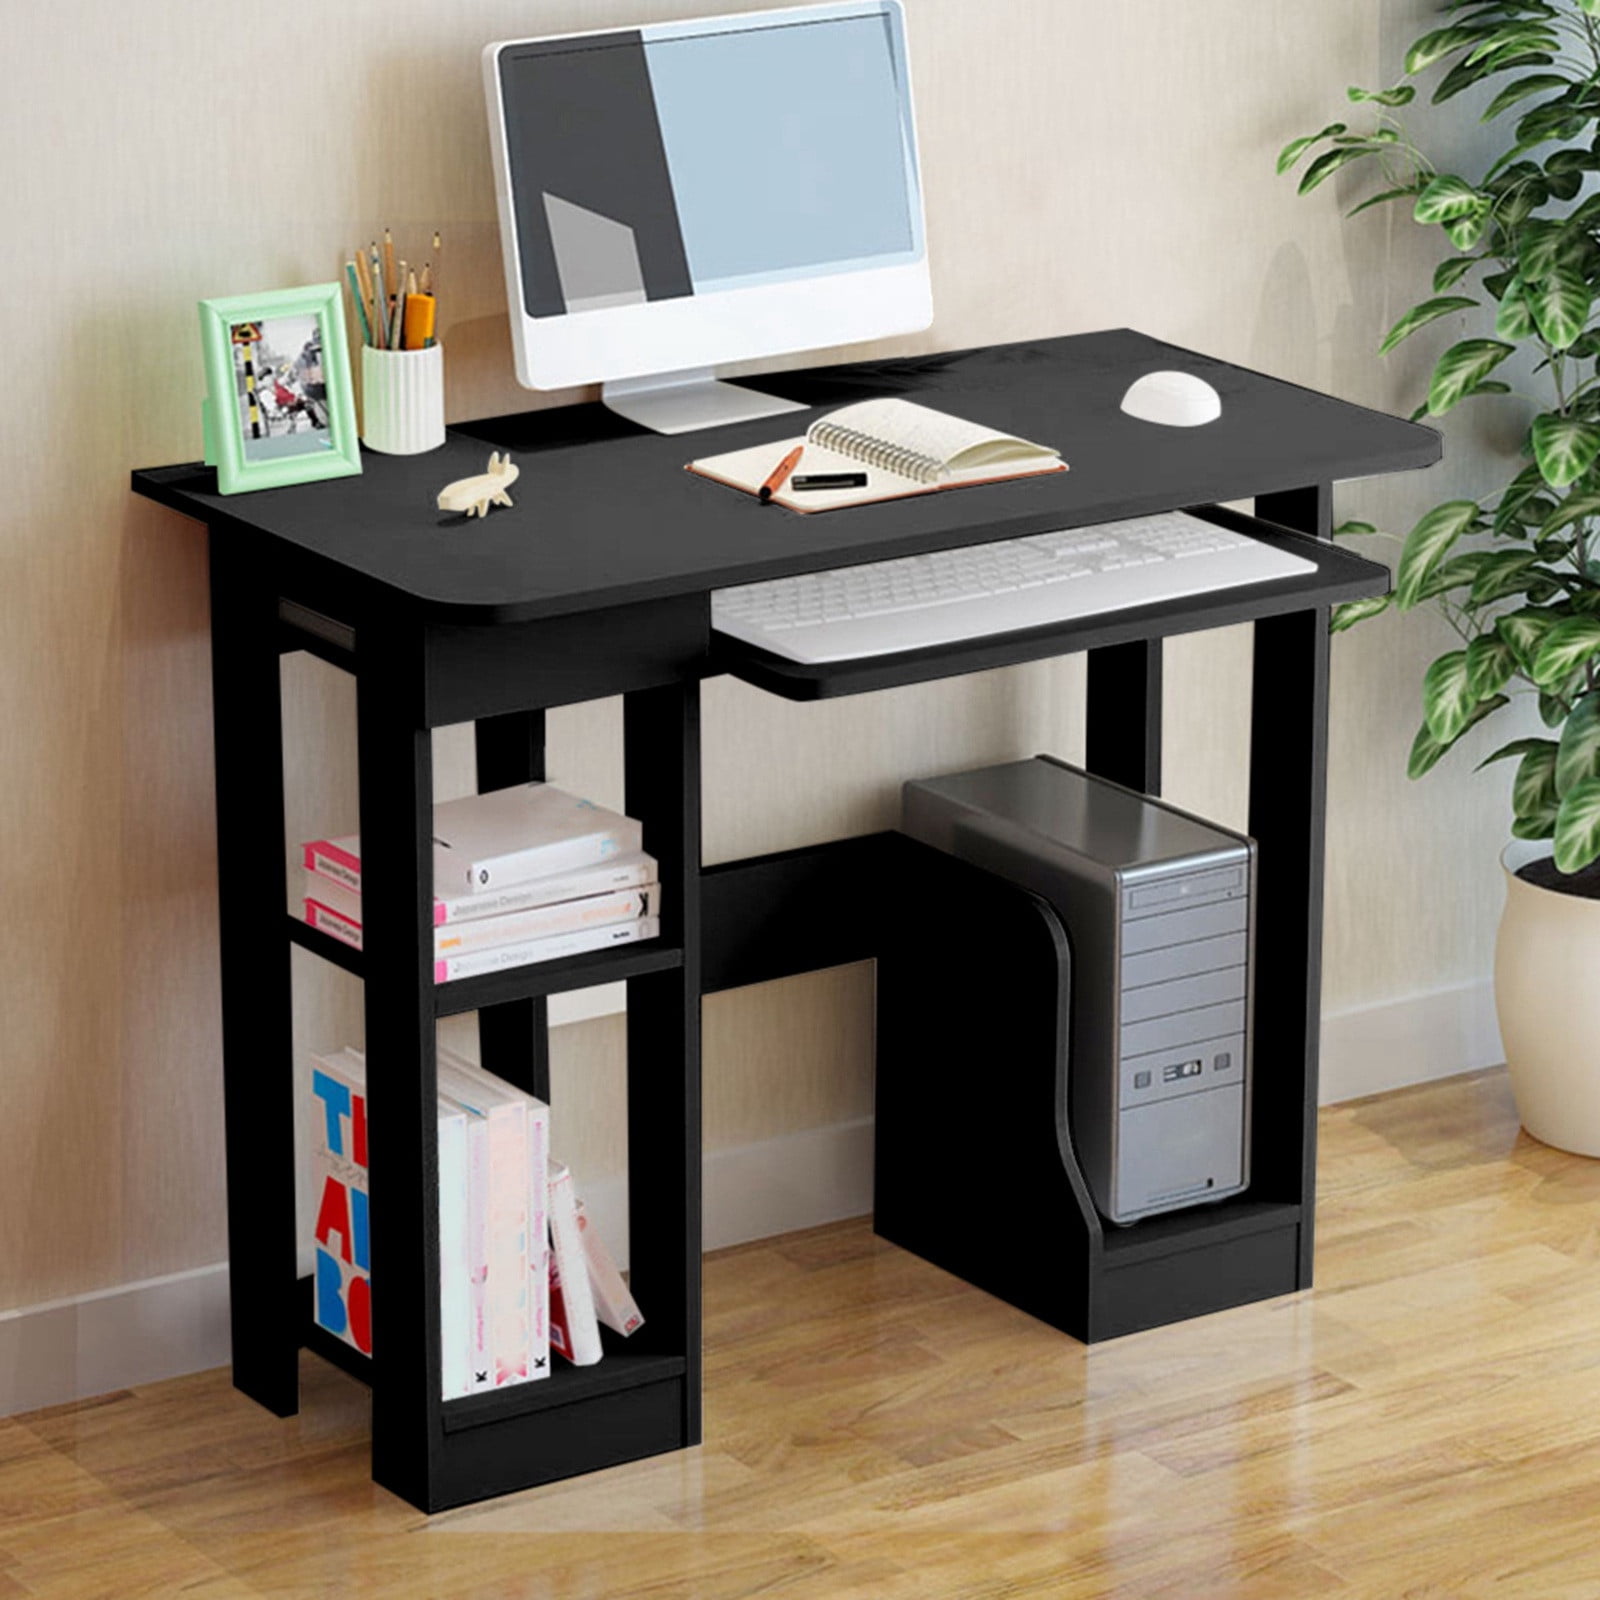 Details about   Computer Desk PC Laptop Table Study Workstation Wood Home Office w/Shelf USA New 